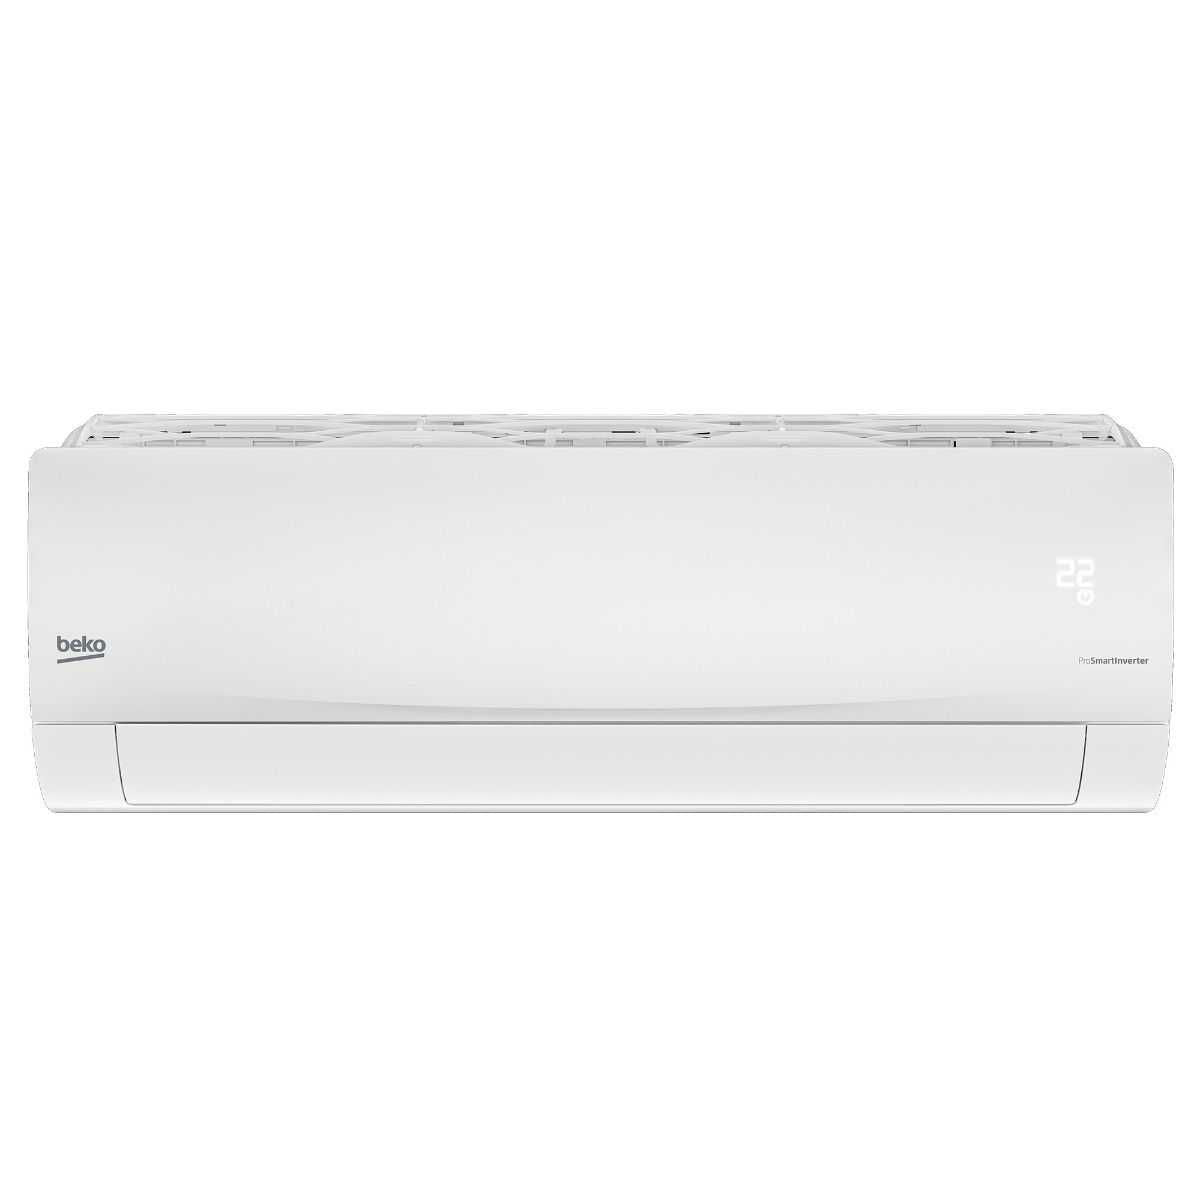 Beko Cooling Only Split Air Conditioner With Inverter Technology, 1.5 HP, White - BICT1220